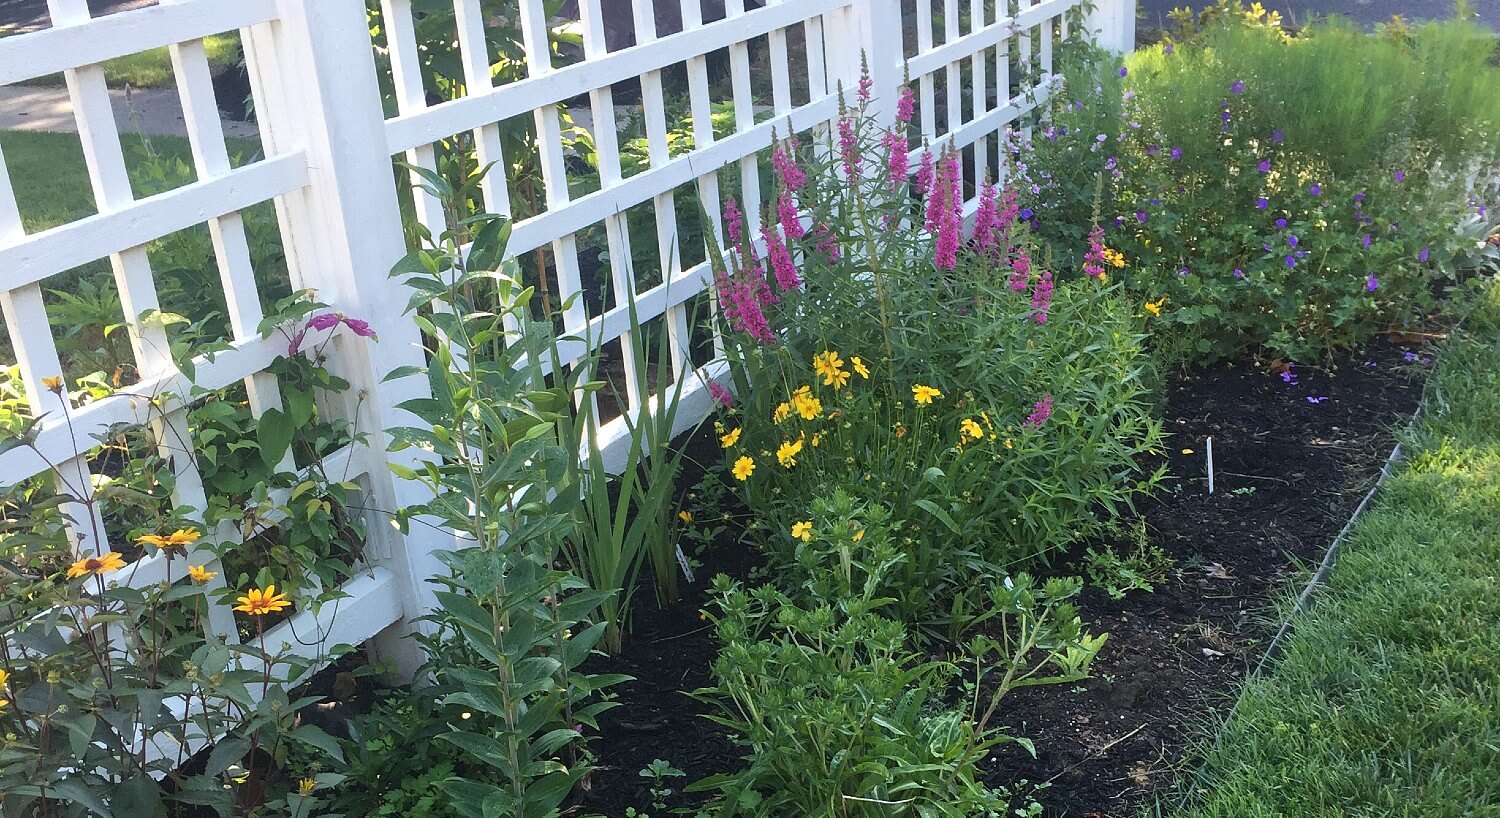 A garden bed full of yellow, pink, and purple flowering plants against a white fence